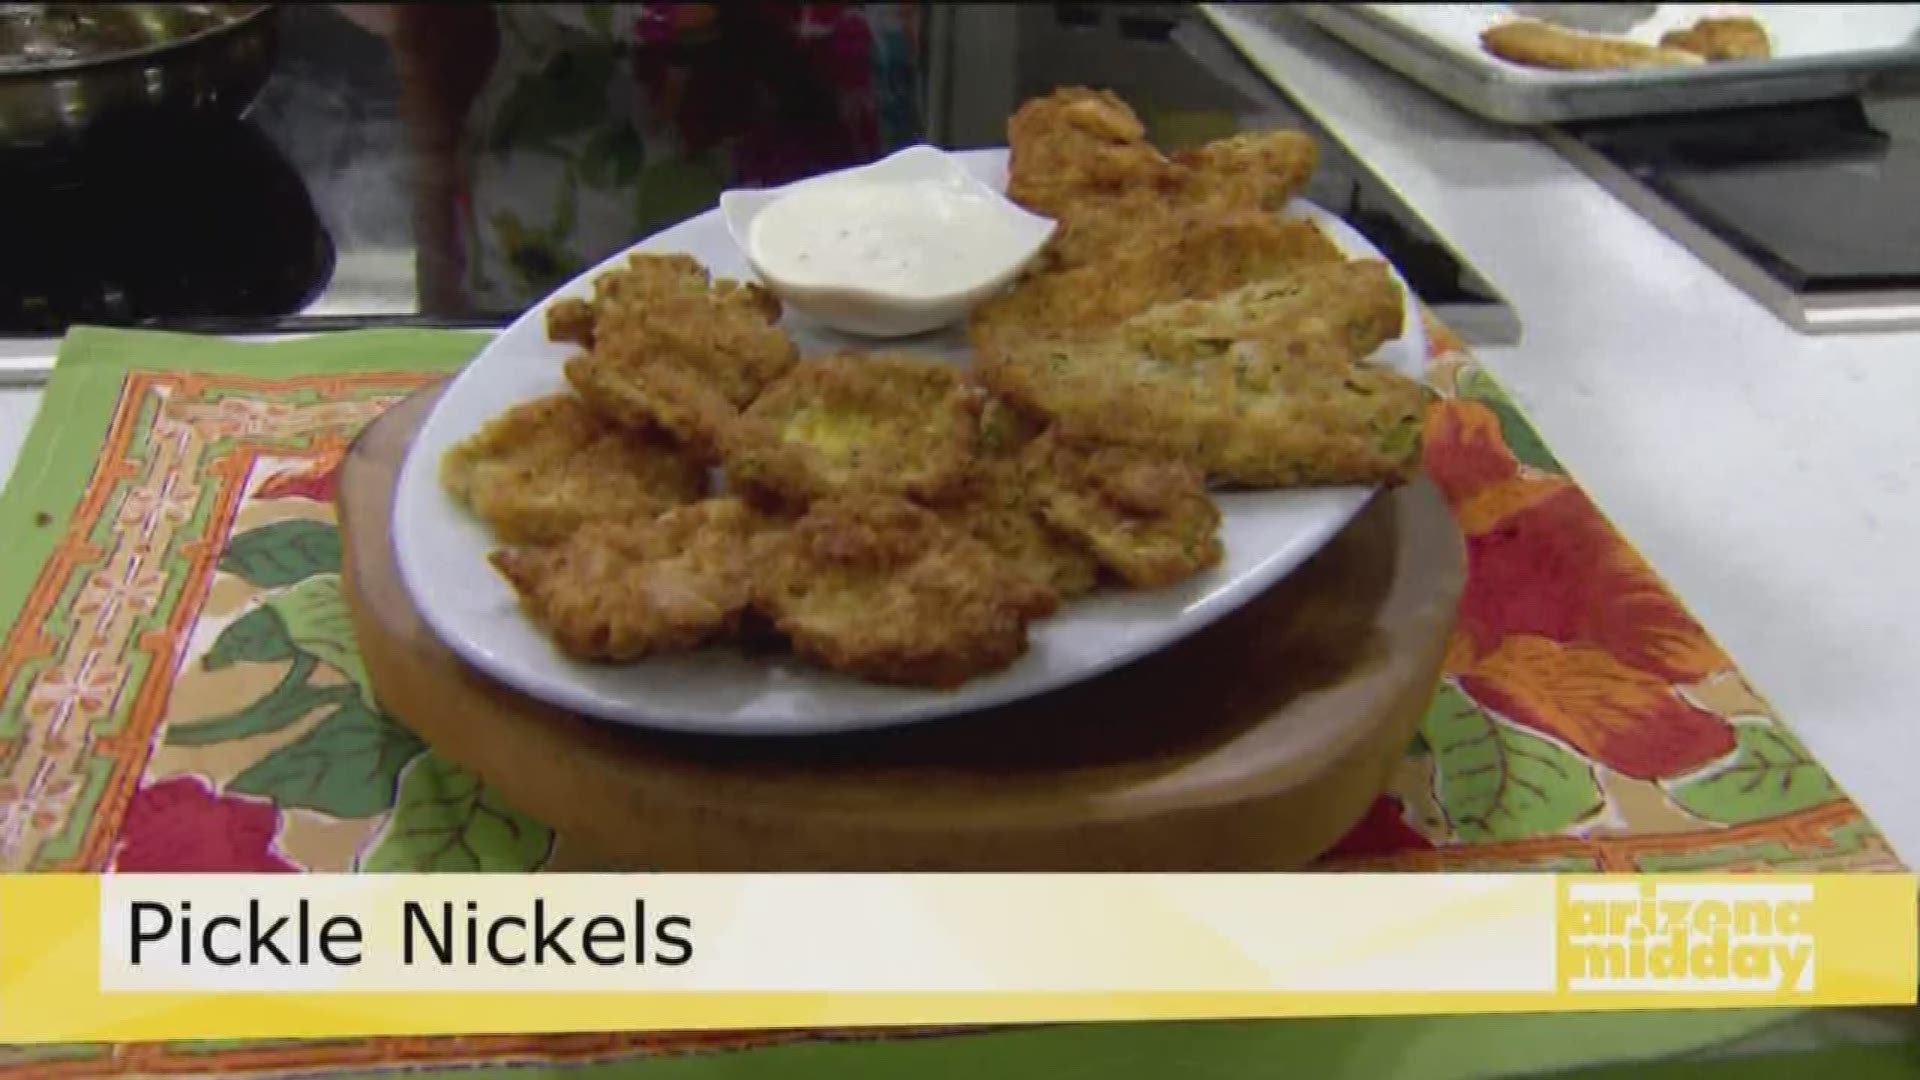 They're a super popular game day snack! Jan's in the kitchen makin' deep fried pickles!